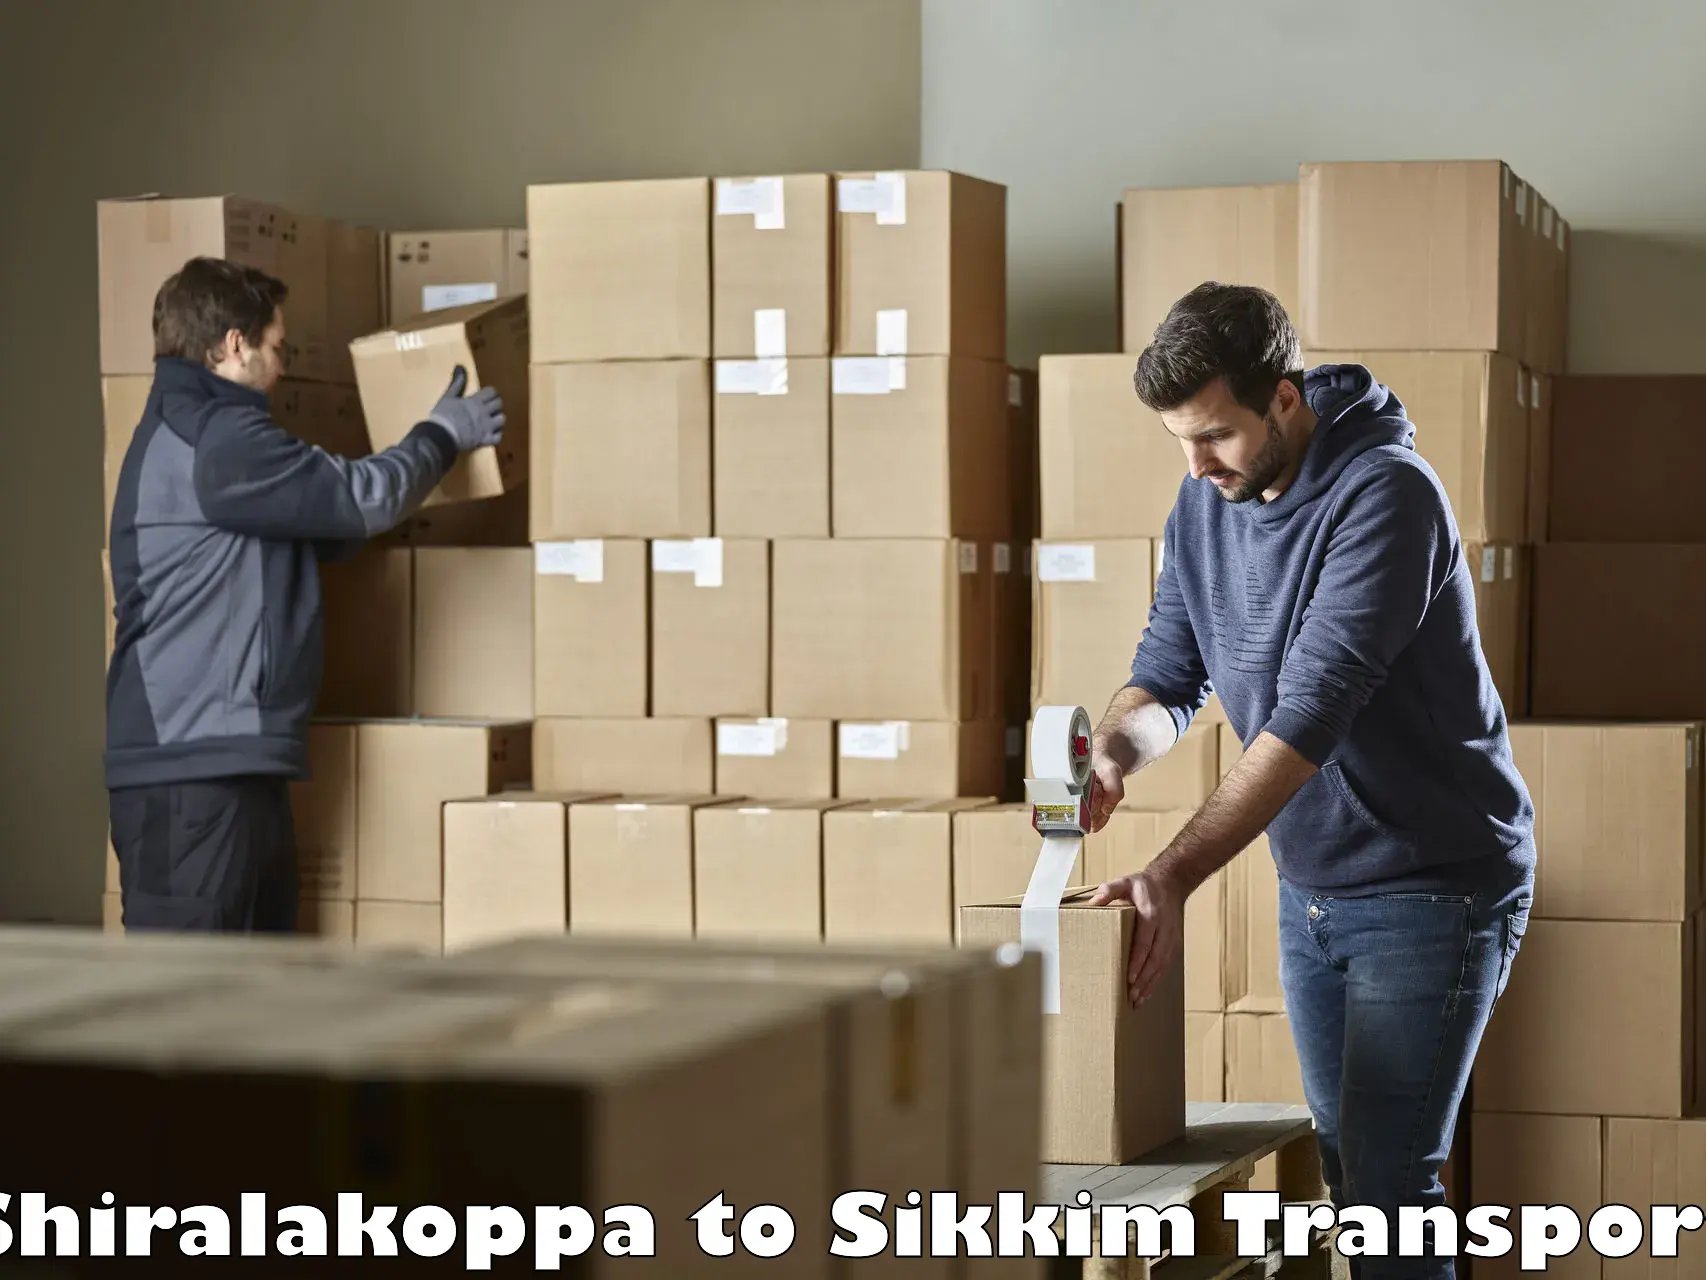 Container transport service Shiralakoppa to South Sikkim